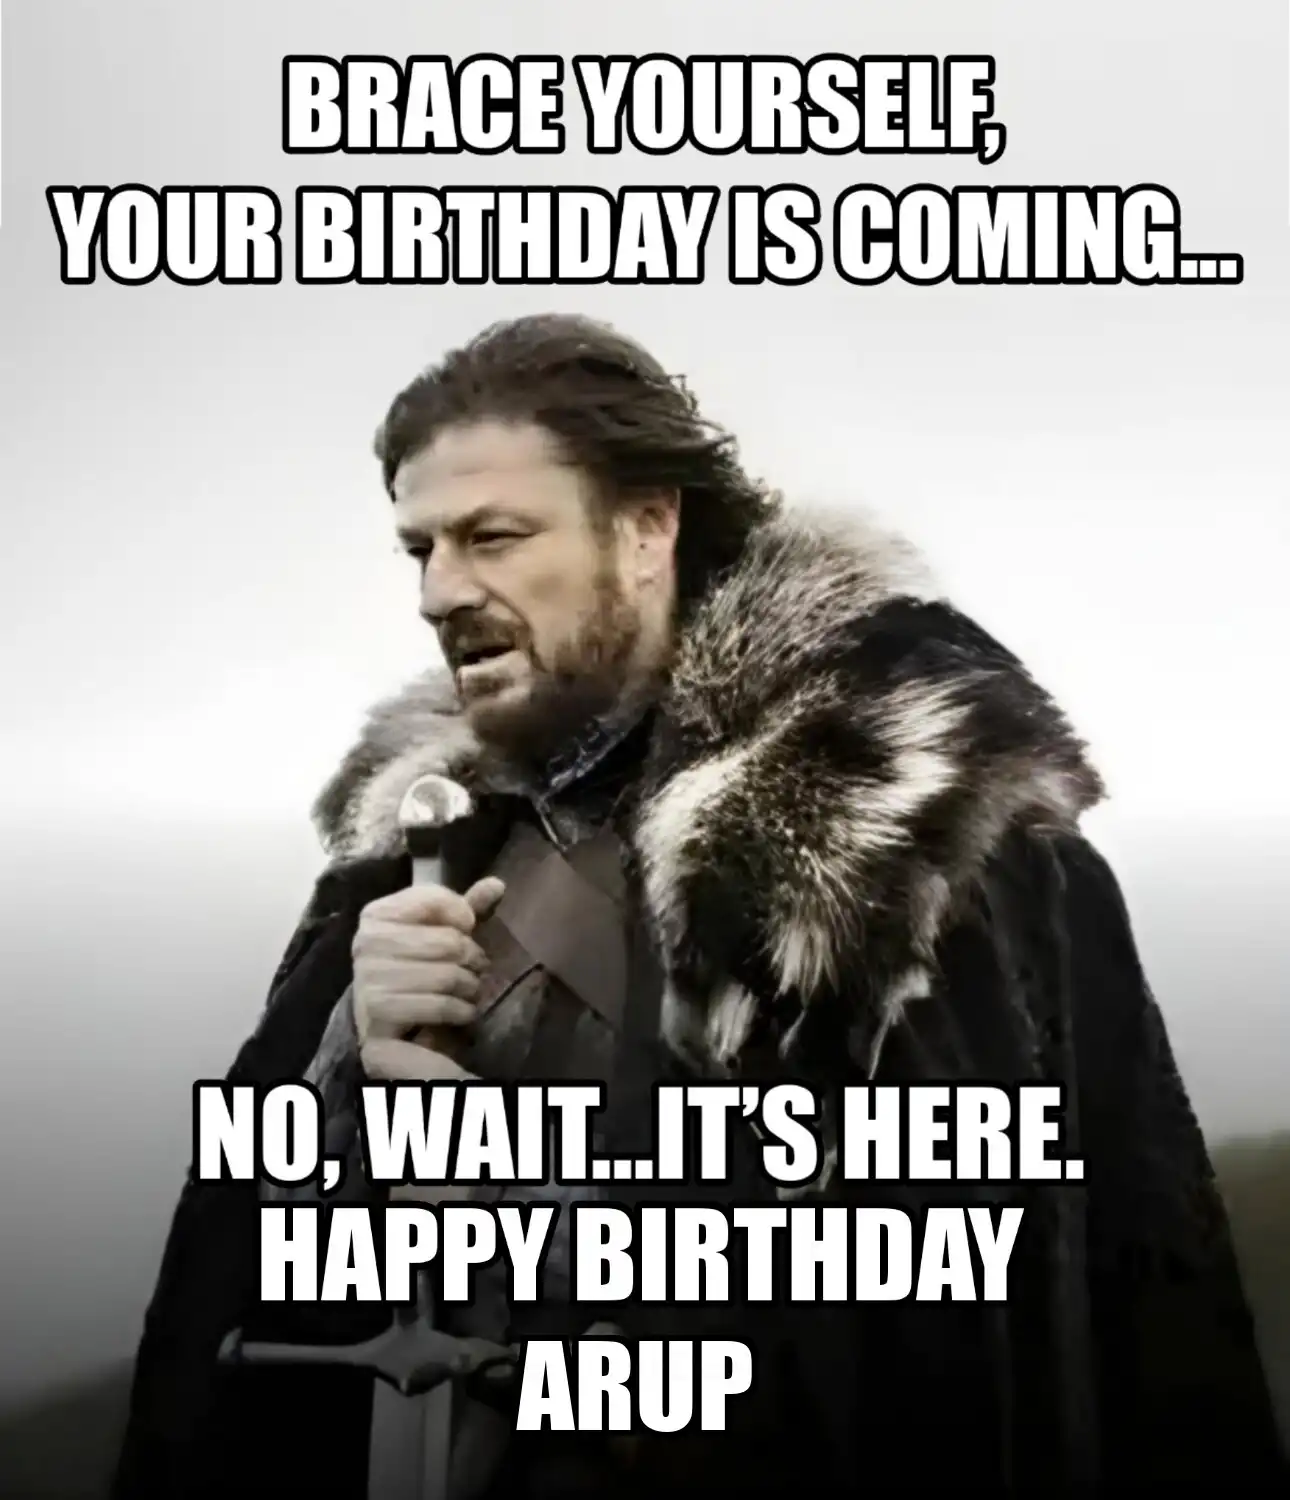 Happy Birthday Arup Brace Yourself Your Birthday Is Coming Meme